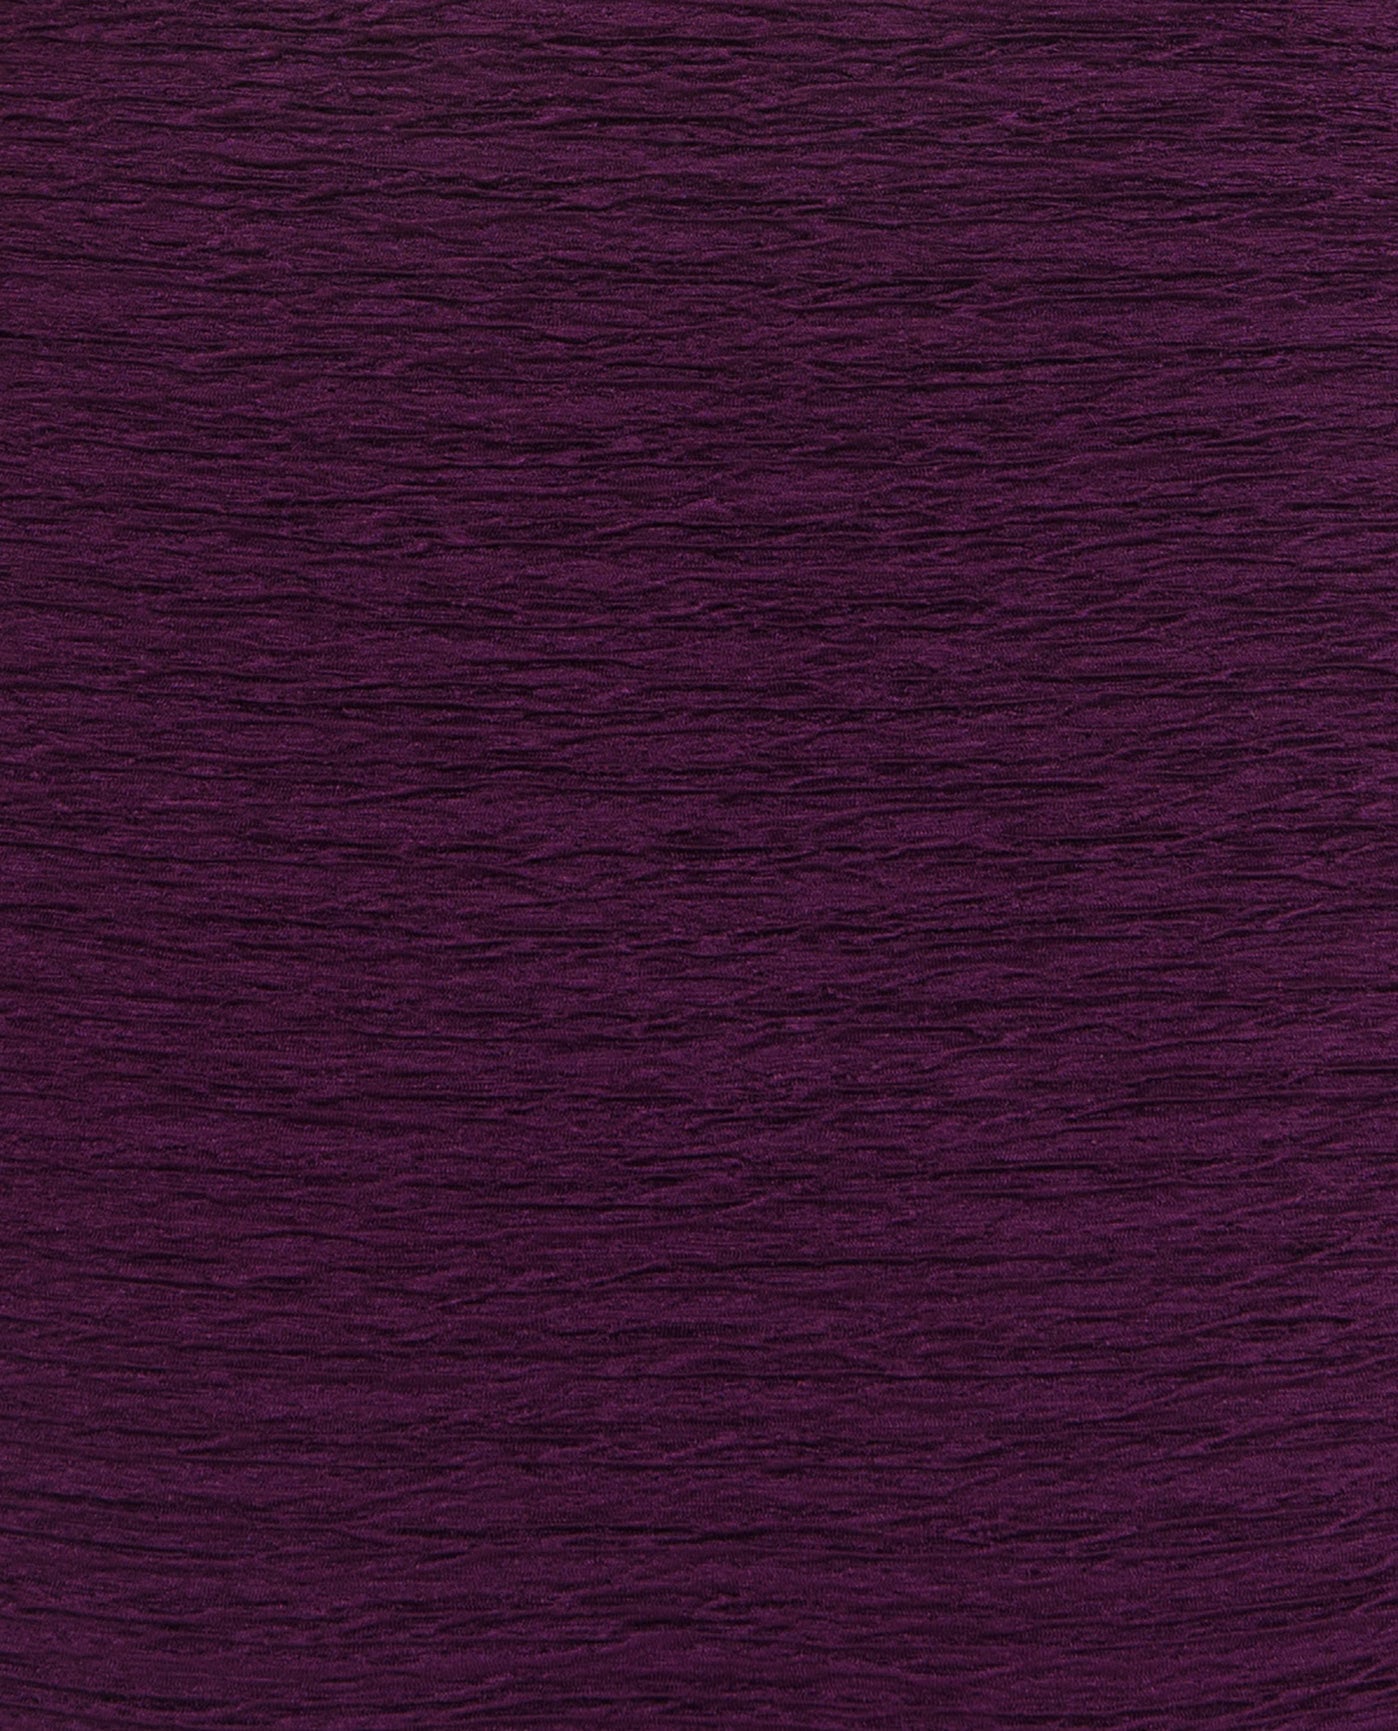 FABRIC SWATCH VIEW OF CHLORINE RESISTANT KRINKLE TEXTURED SOLID X-BACK ONE PIECE | KRINKLE EGGPLANT